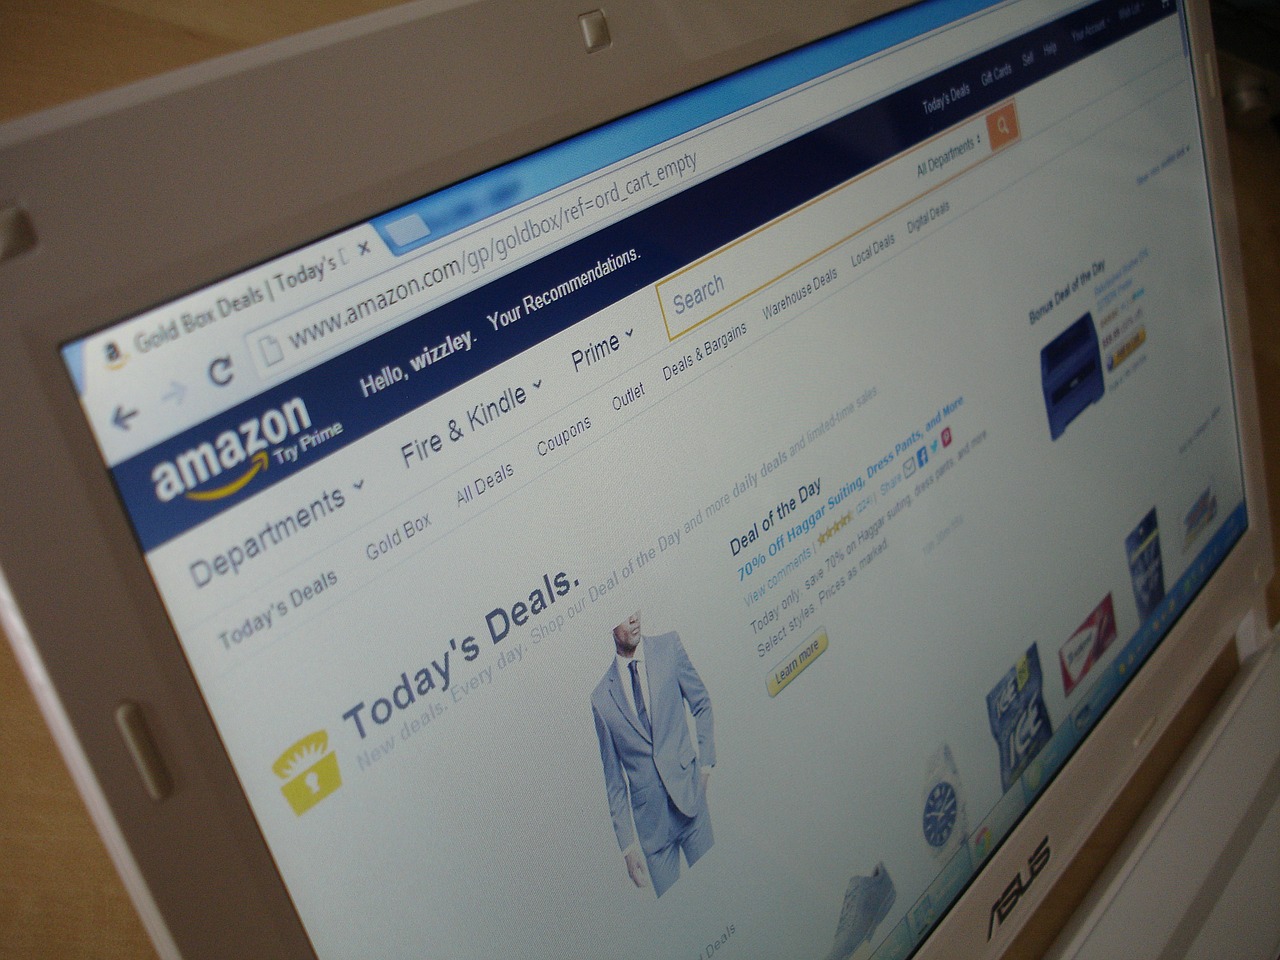 Amazon takes legal challenge against partner Future Group to India Supreme Court